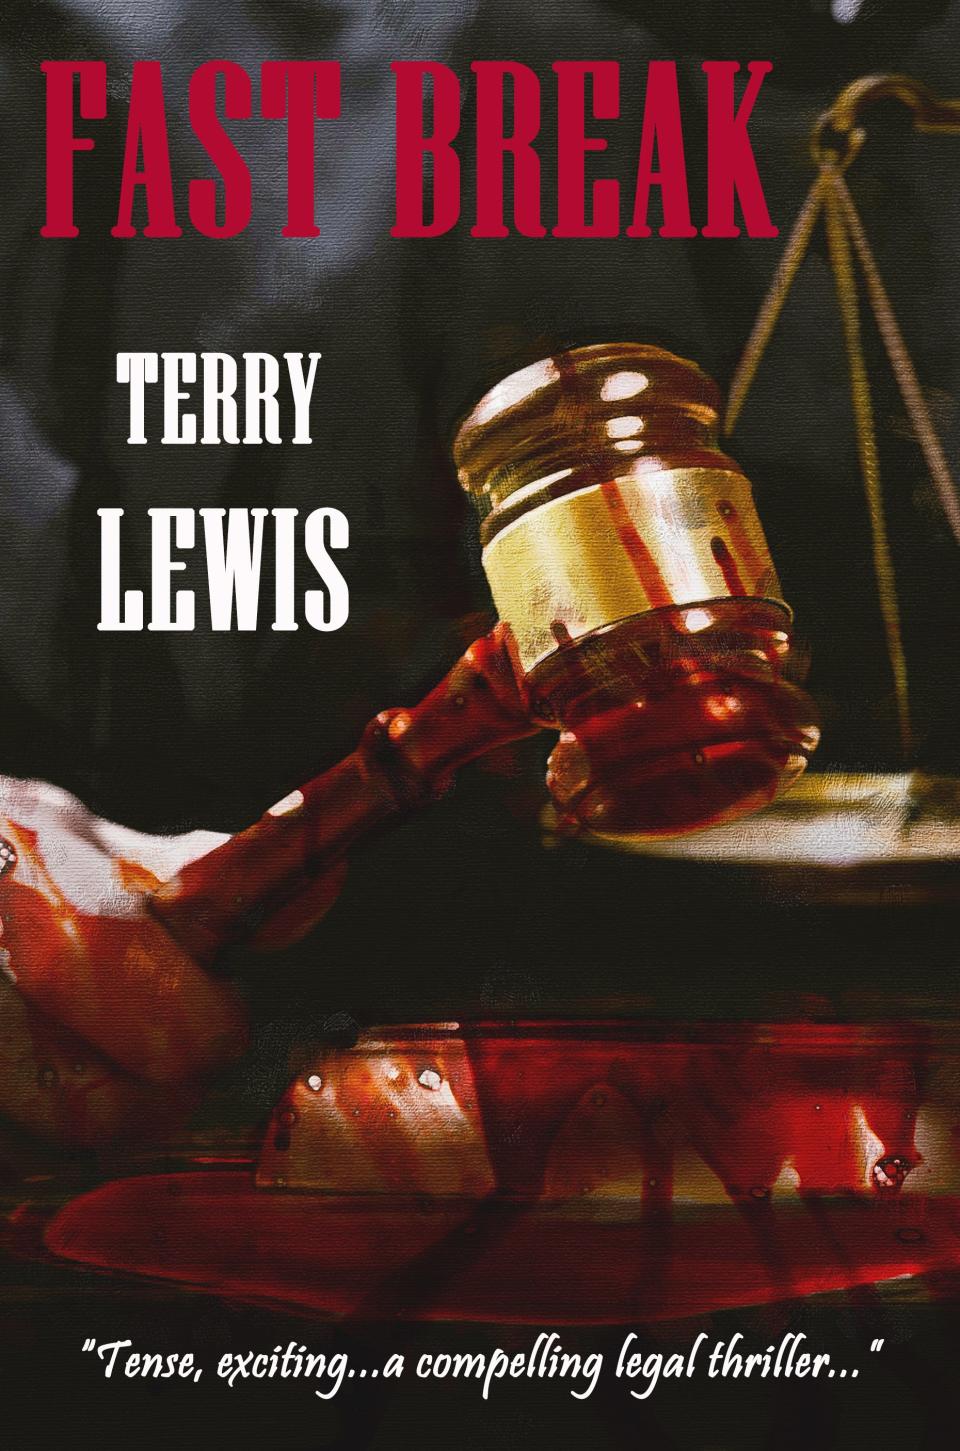 Former circuit court judge Terry Lewis newest novel, "Fast Break" (Moonshine Cove, May 2022).